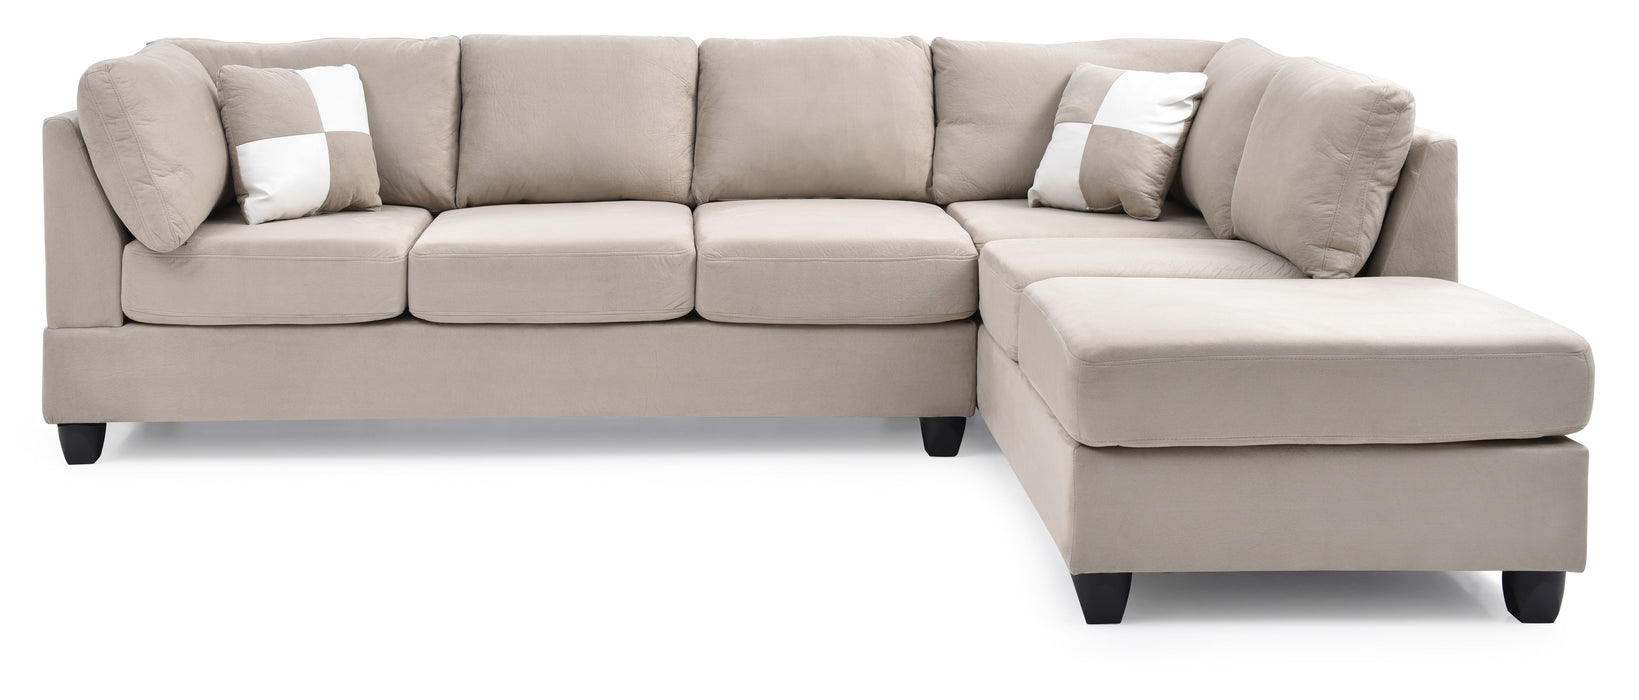 Glory Furniture Malone Sectional (3 Boxes), White - Microfiber